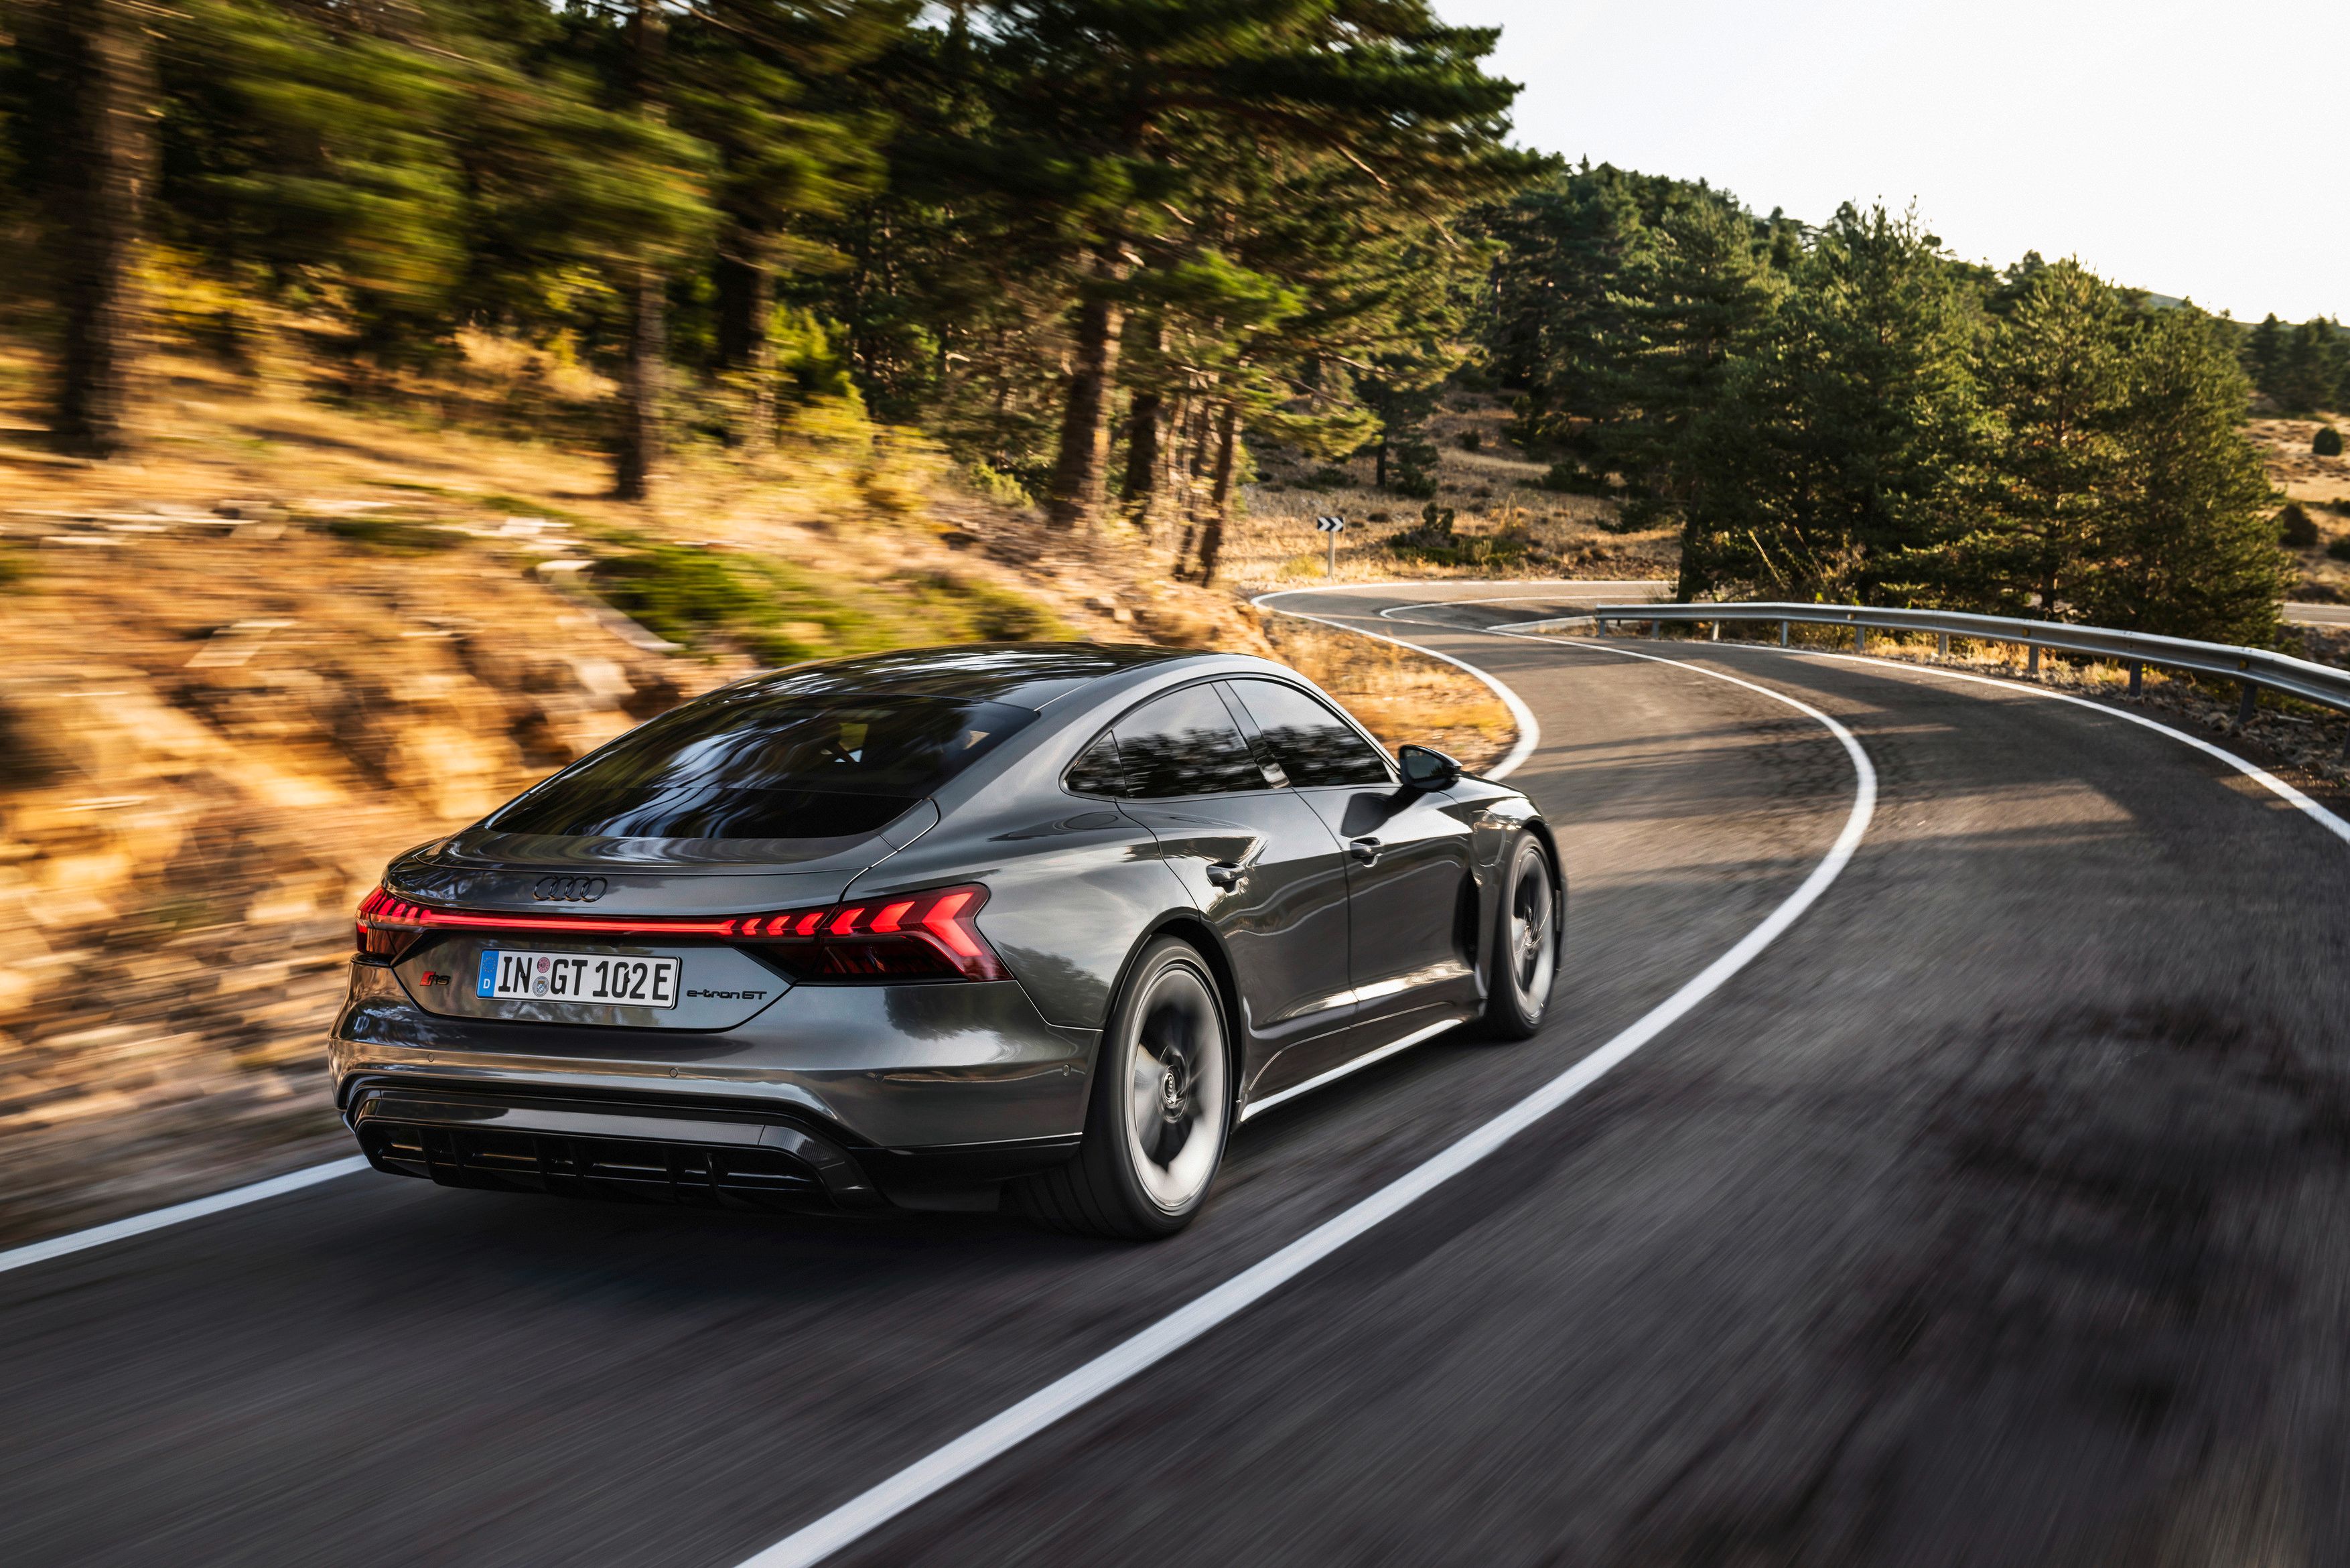 The Audi E-Tron GT on a road trip.